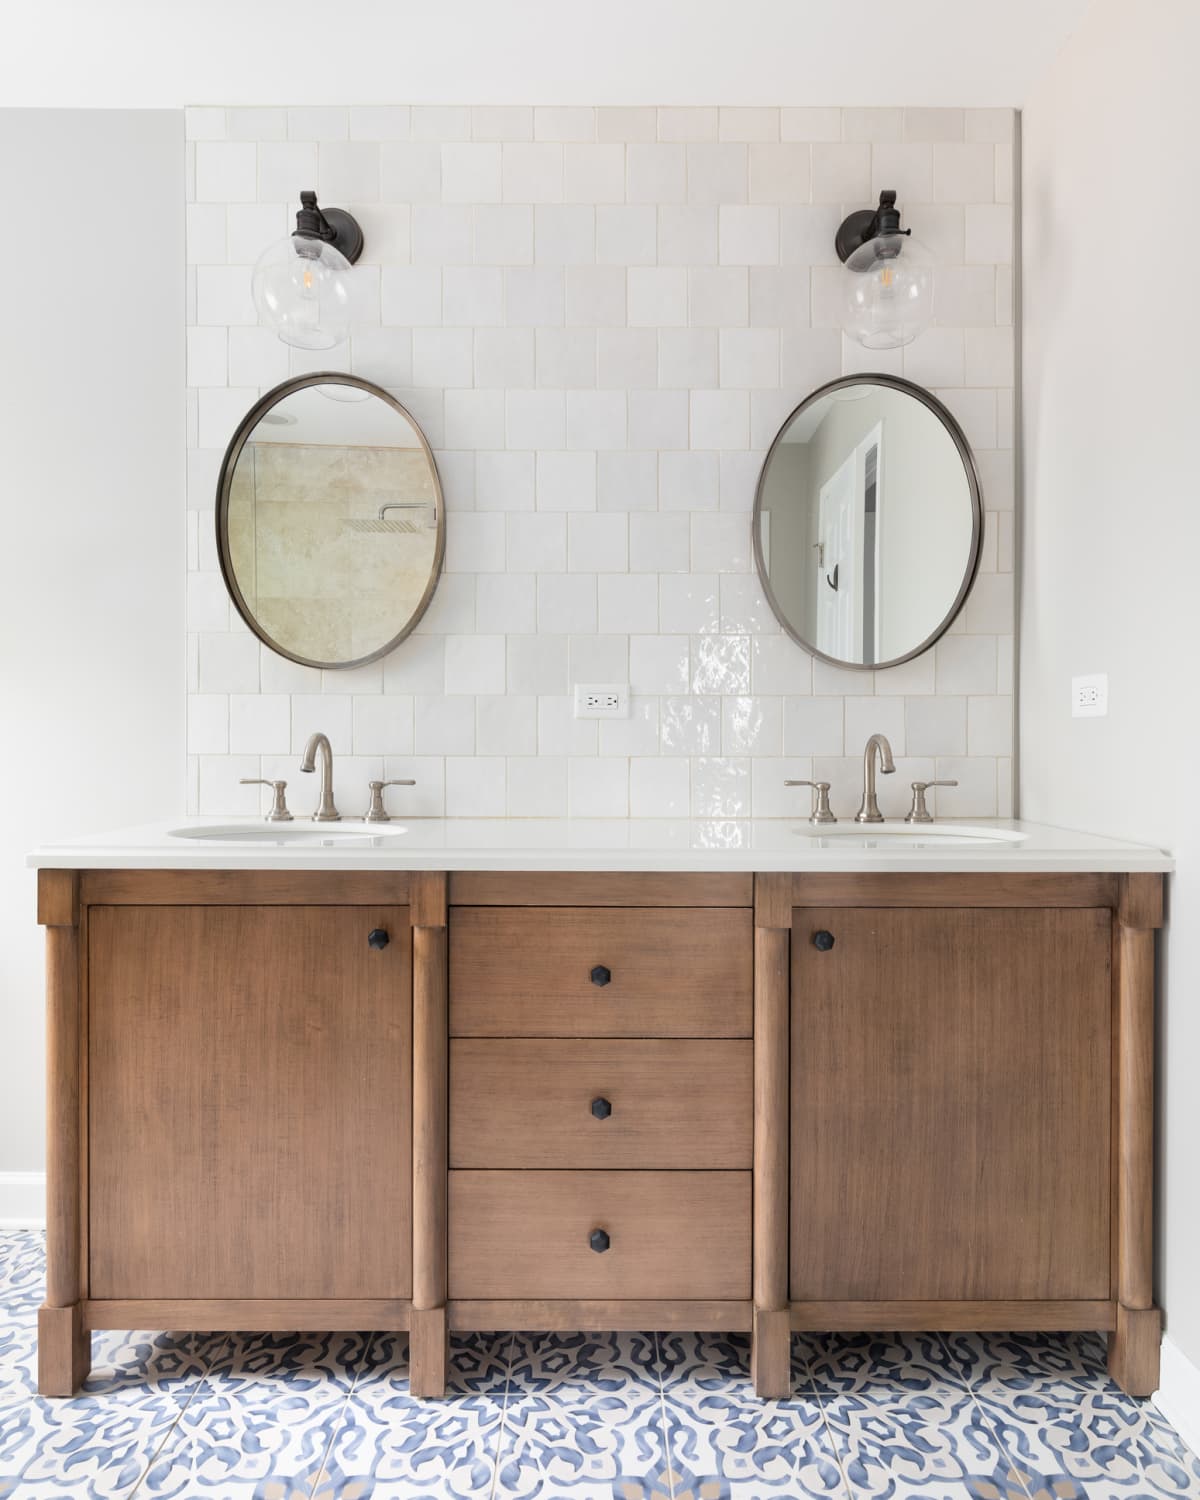 A cozy bathroom with a patterned tile floor, natural wood vanity, tiled backsplash, and lights mounted above circular mirrors